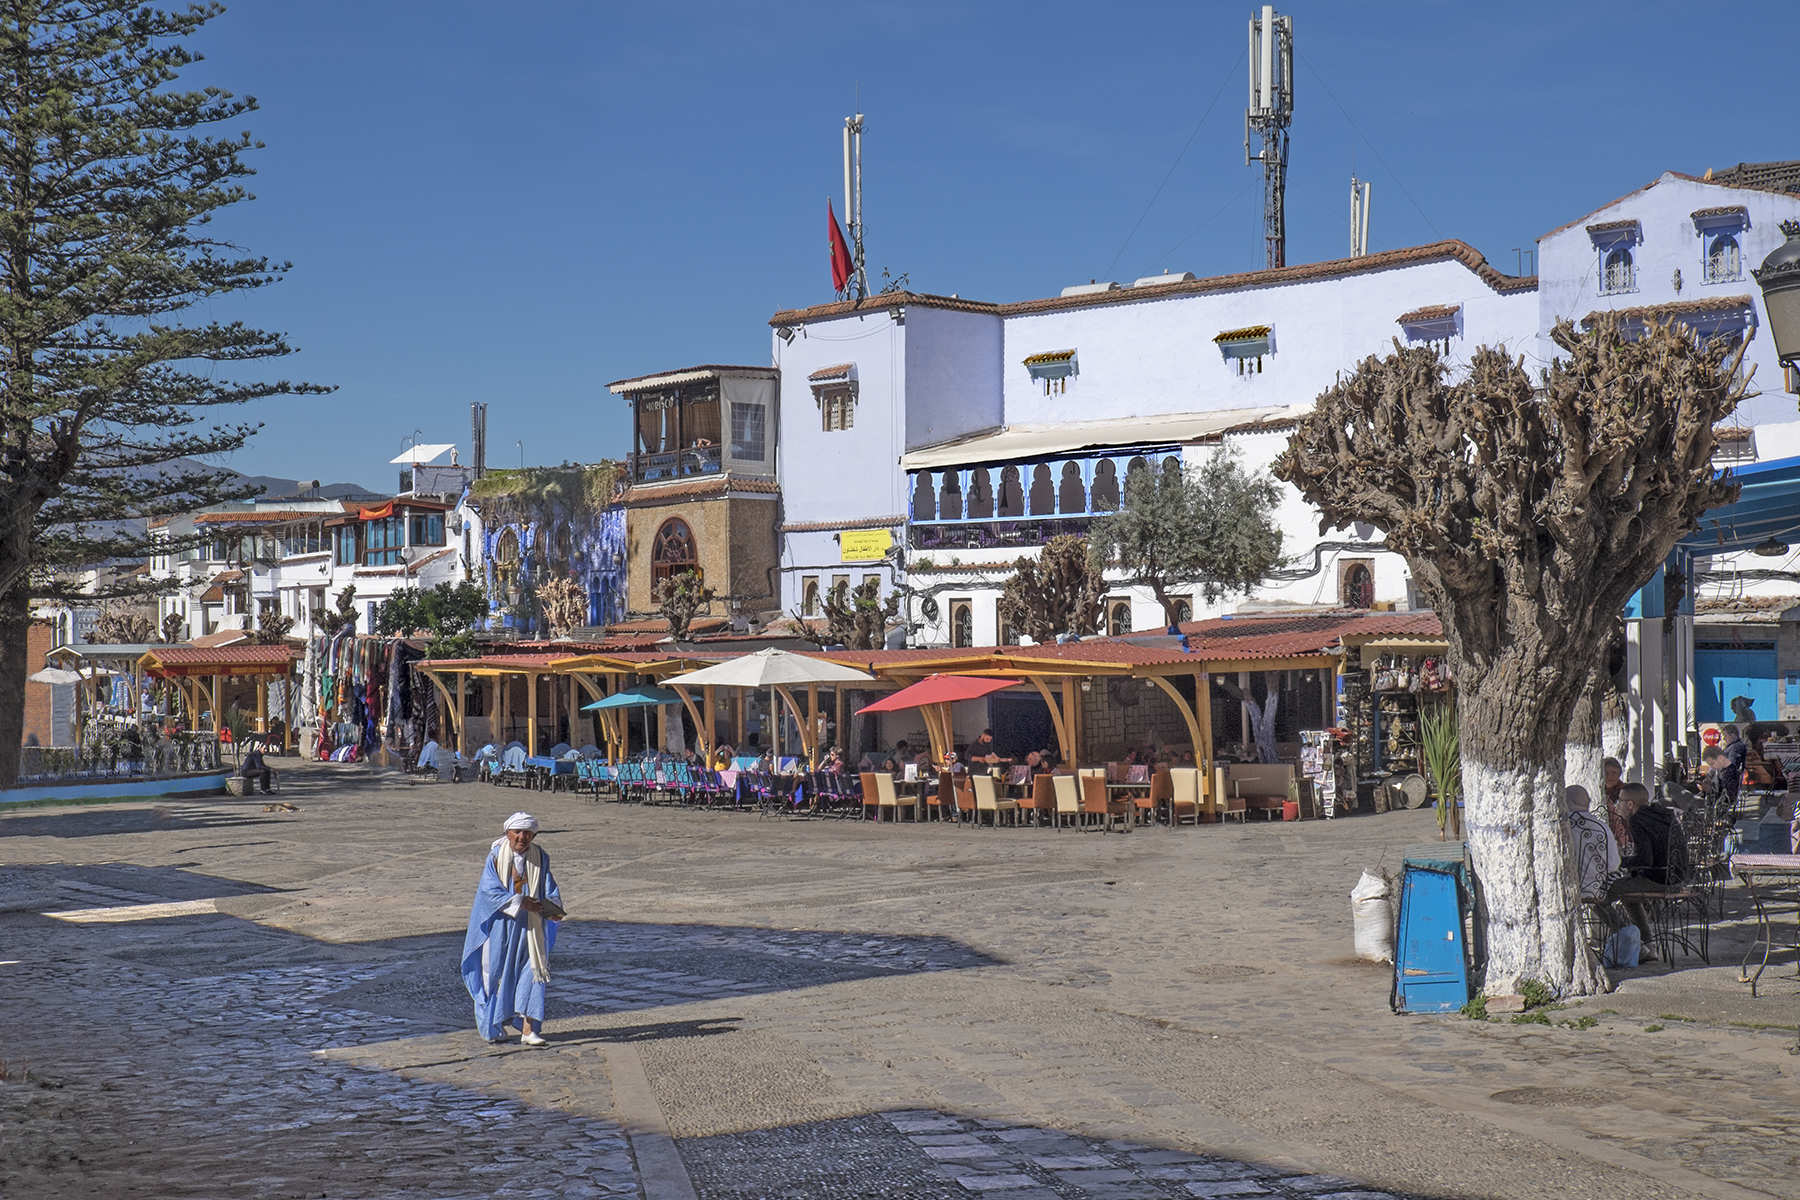 Plaza, Chefchauen, Morocco<p><a class="nav-link" href="/content.html?page=6/#TA39" target="_top">Thumbnail</a>